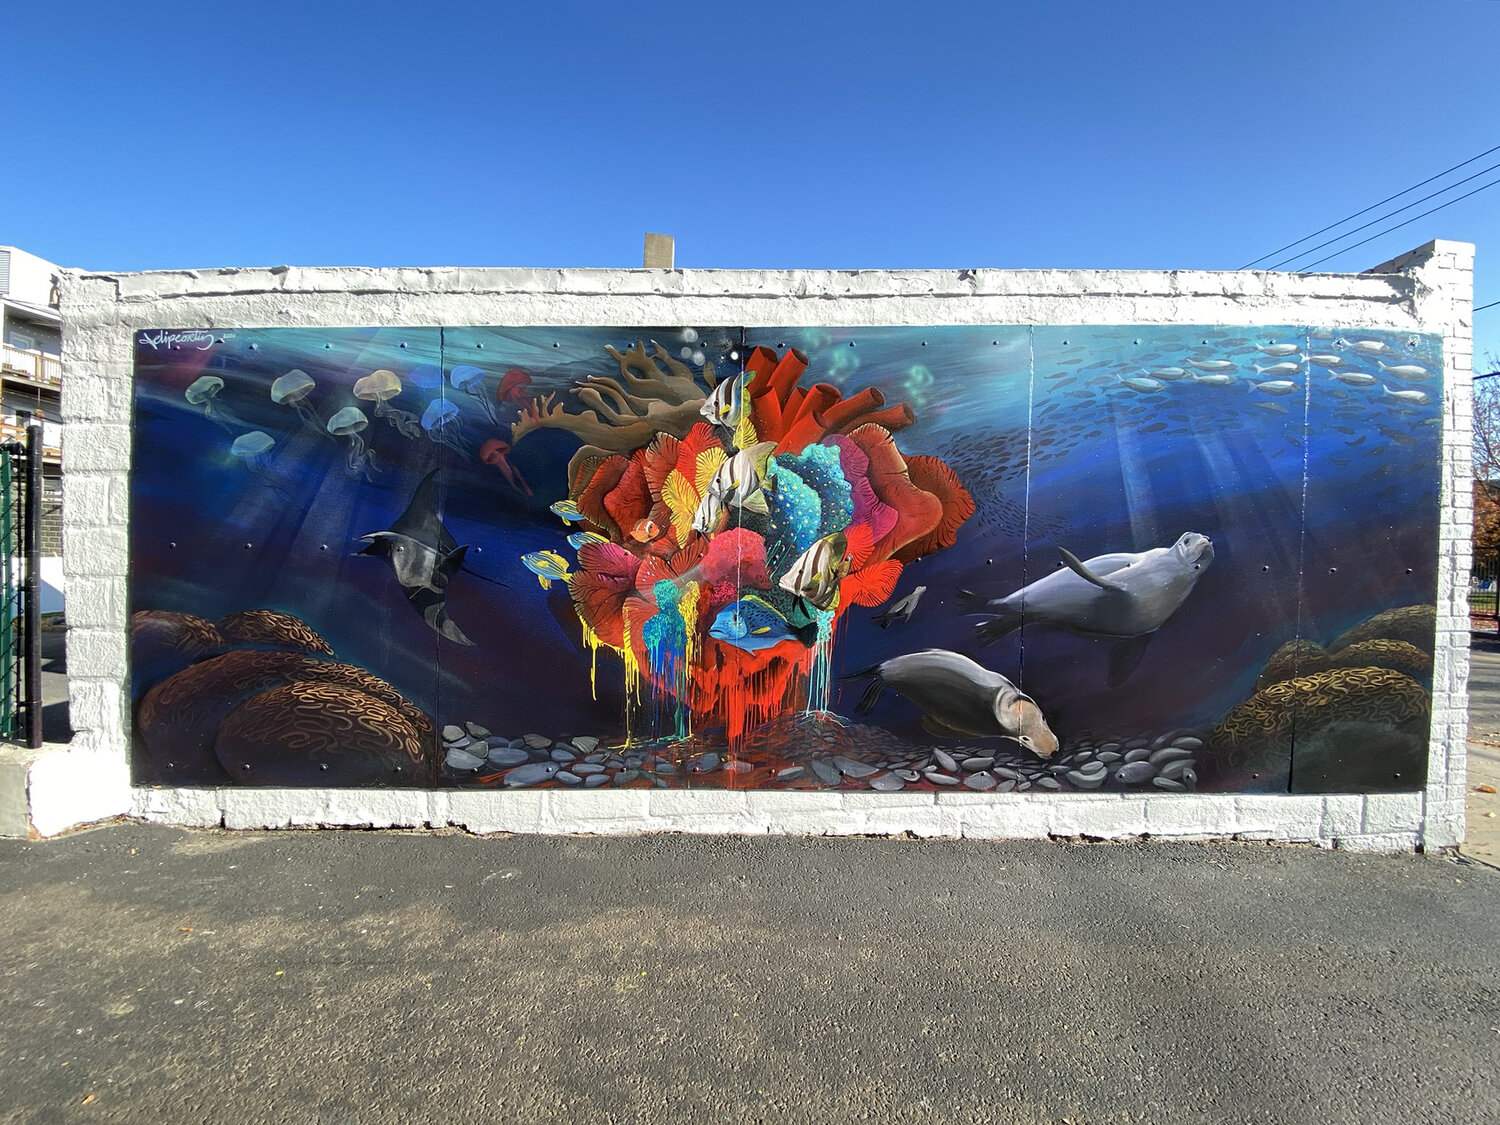    Heart of the Ocean    for SeaWalls Boston and PangeaSeed Foundation. East Boston, MA. 18ft x 8ft. 2020. 